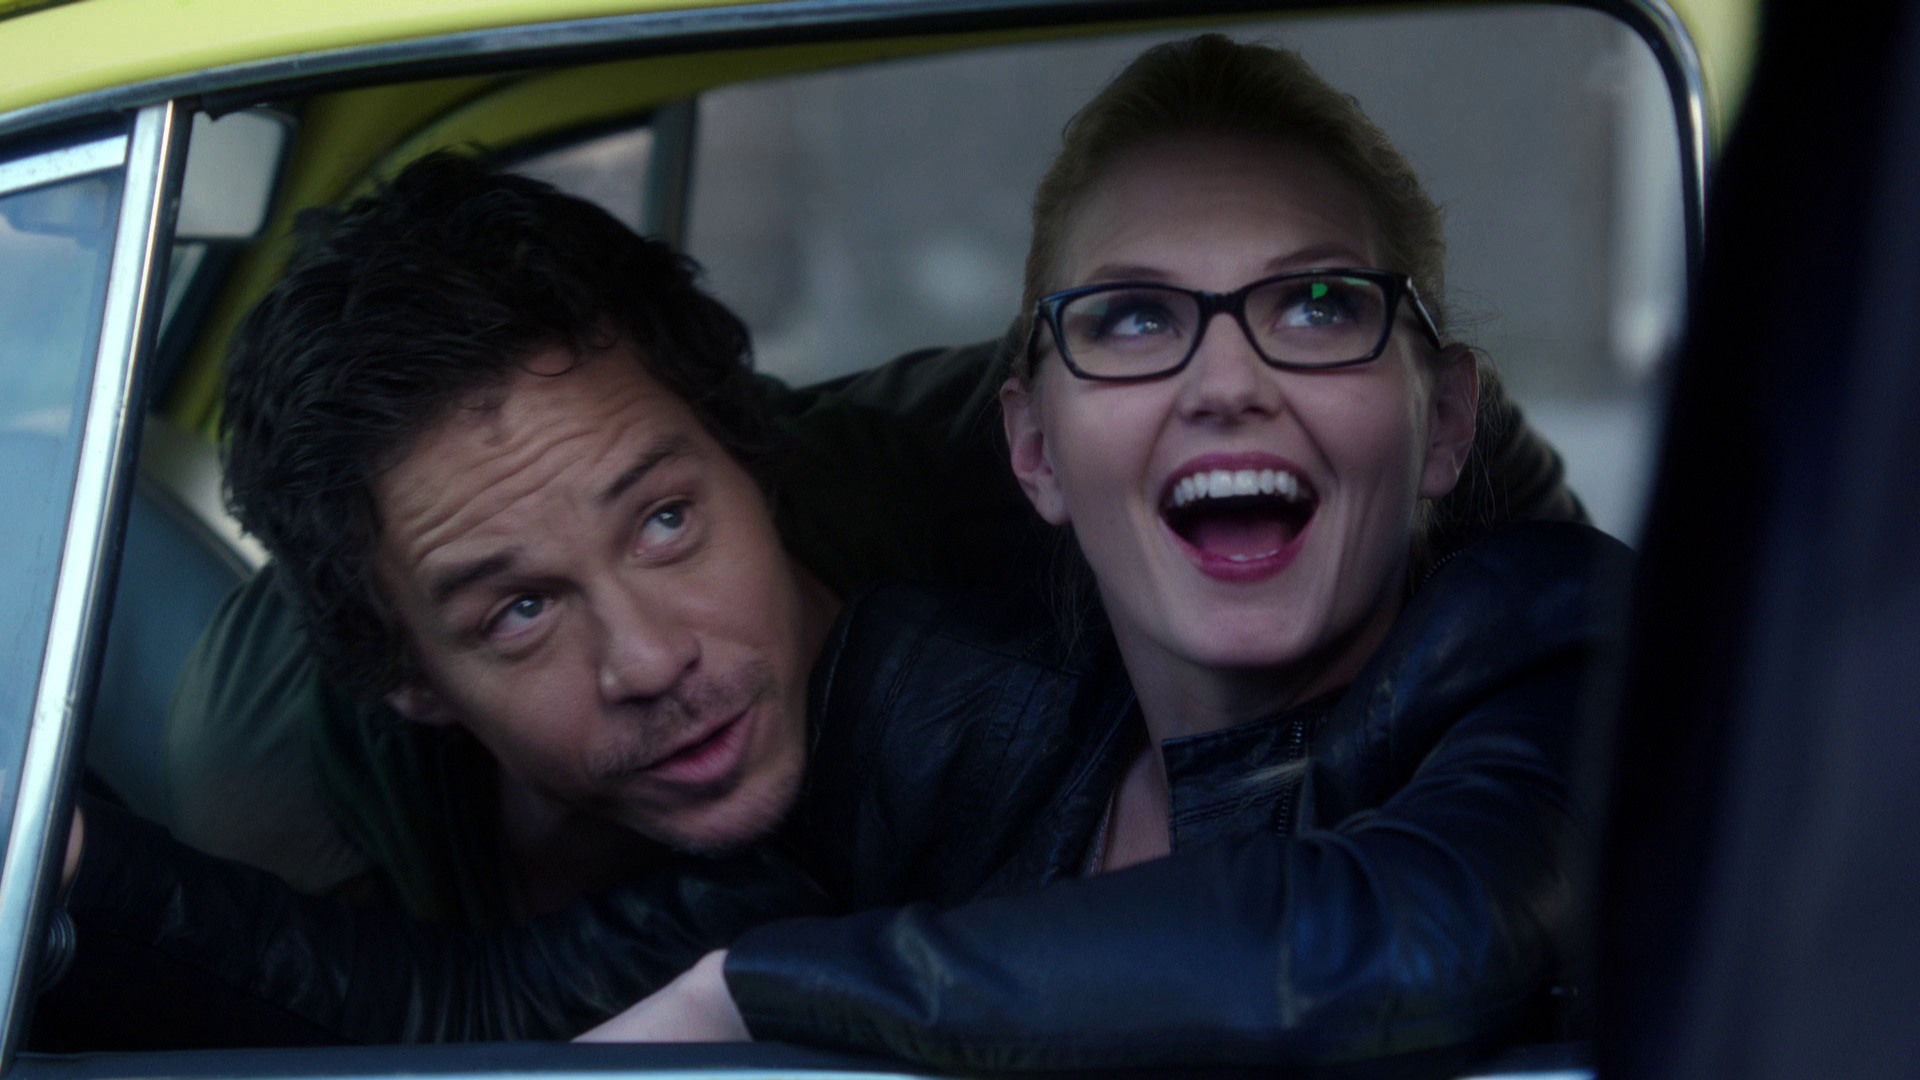 Emma Swan and Neal Cassidy are smiling and talking to an unseen officer in their stolen car.